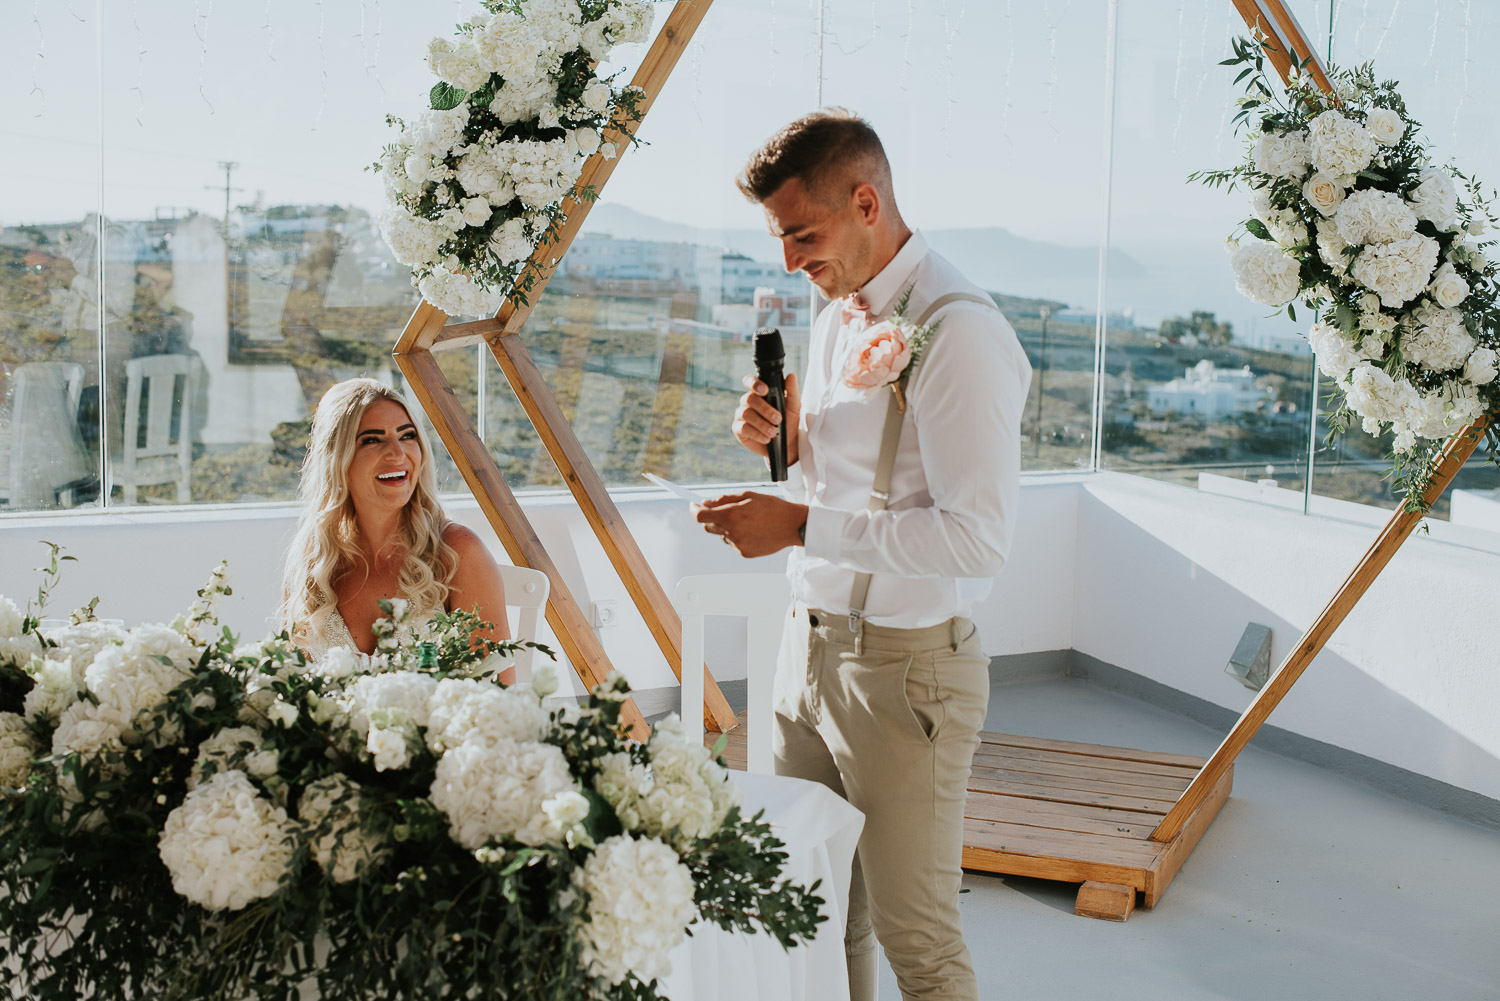 Wedding photographer Santorini: bride smiles as groom reads his speech basked in the sun by Ben and Vesna.